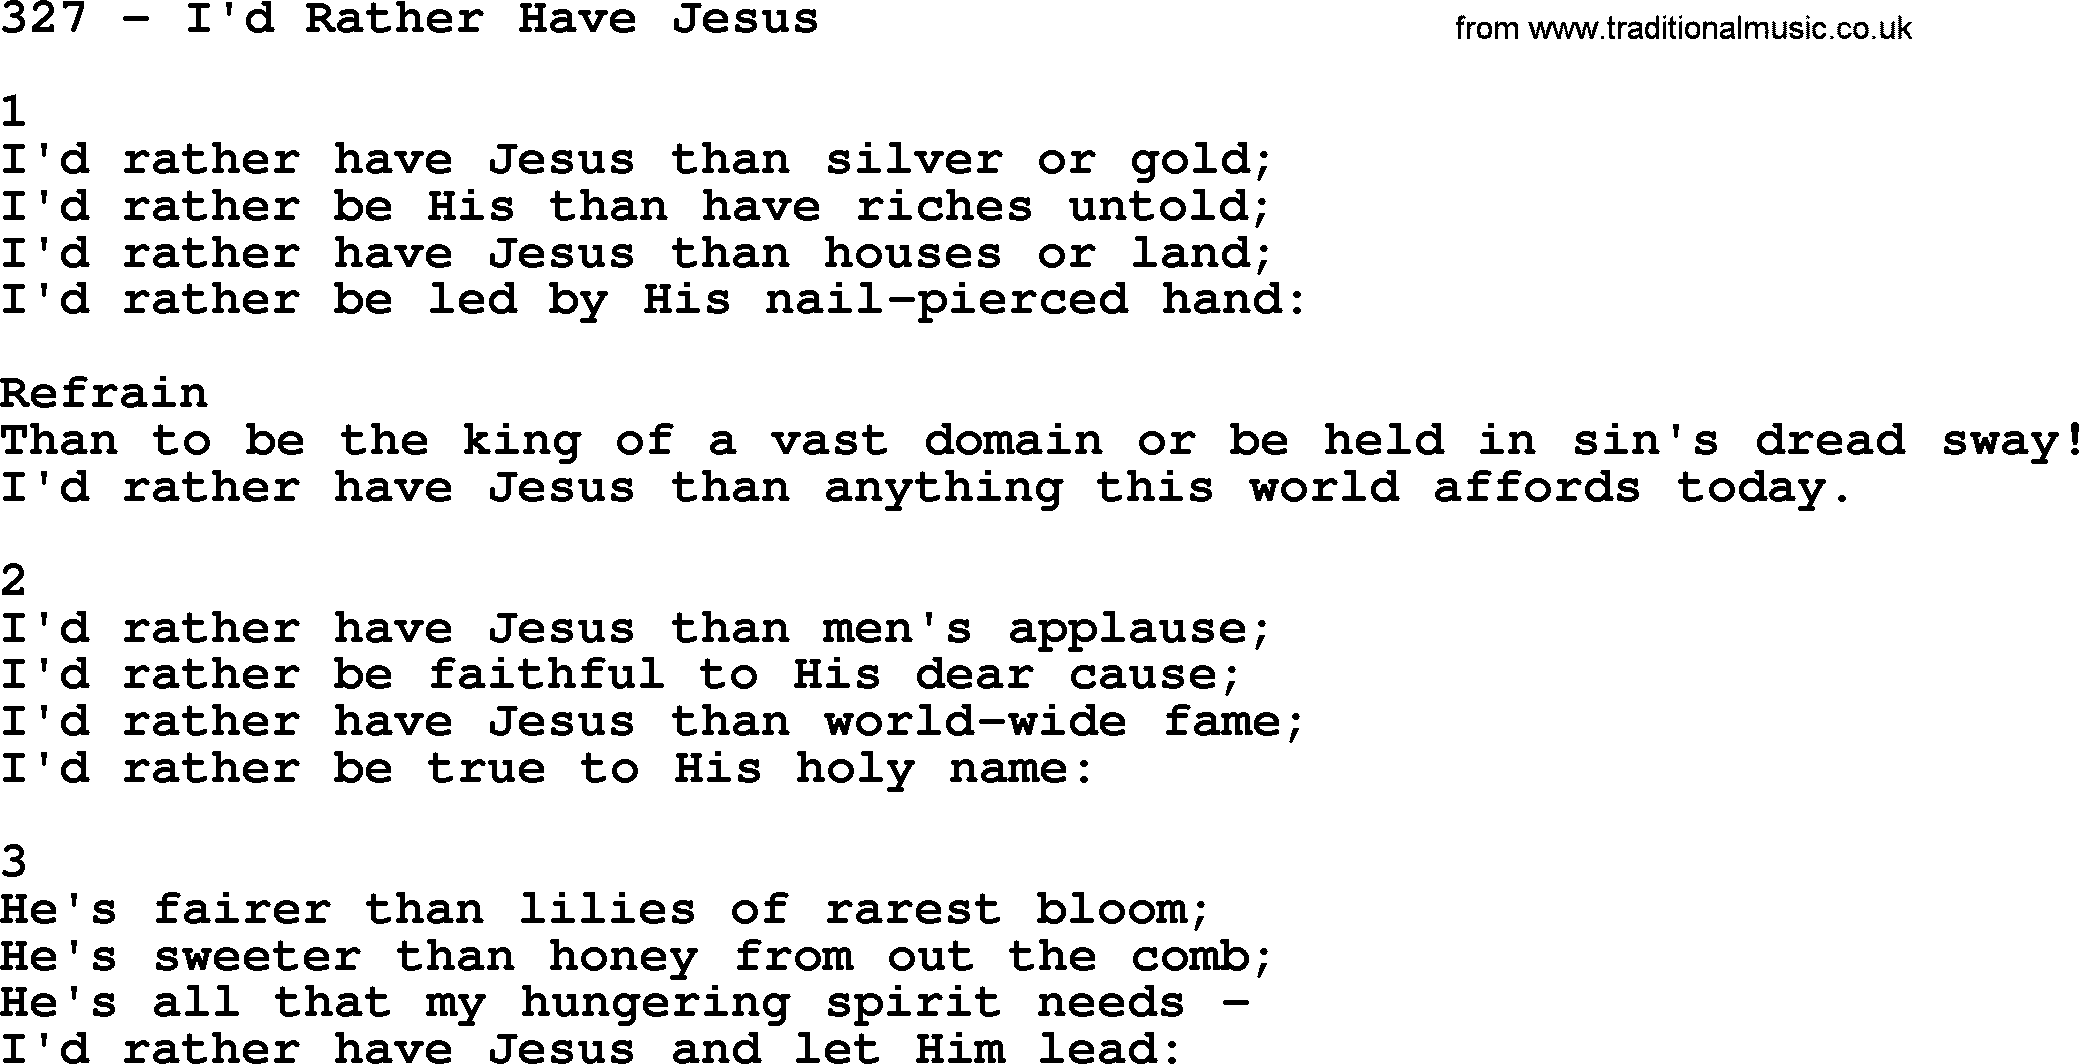 Complete Adventis Hymnal, title: 327-I'd Rather Have Jesus, with lyrics, midi, mp3, powerpoints(PPT) and PDF,